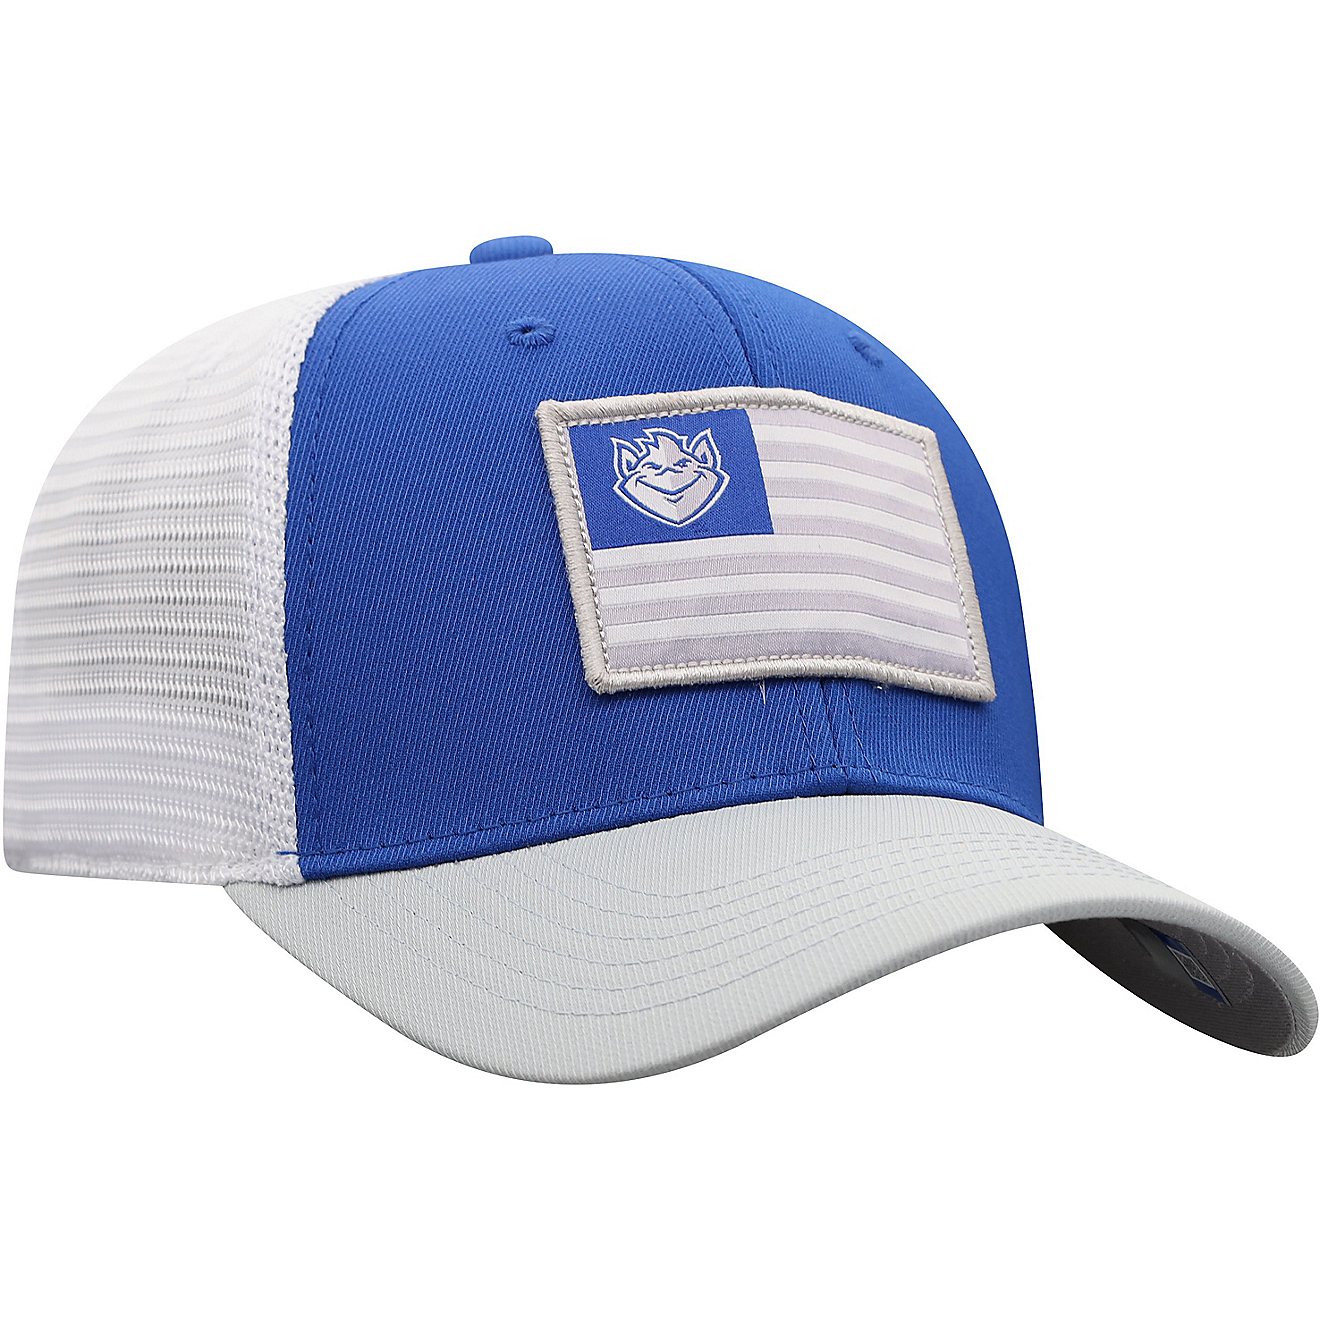 Top of the World Men's Saint Louis University Pedigree One Fit Cap                                                               - view number 1